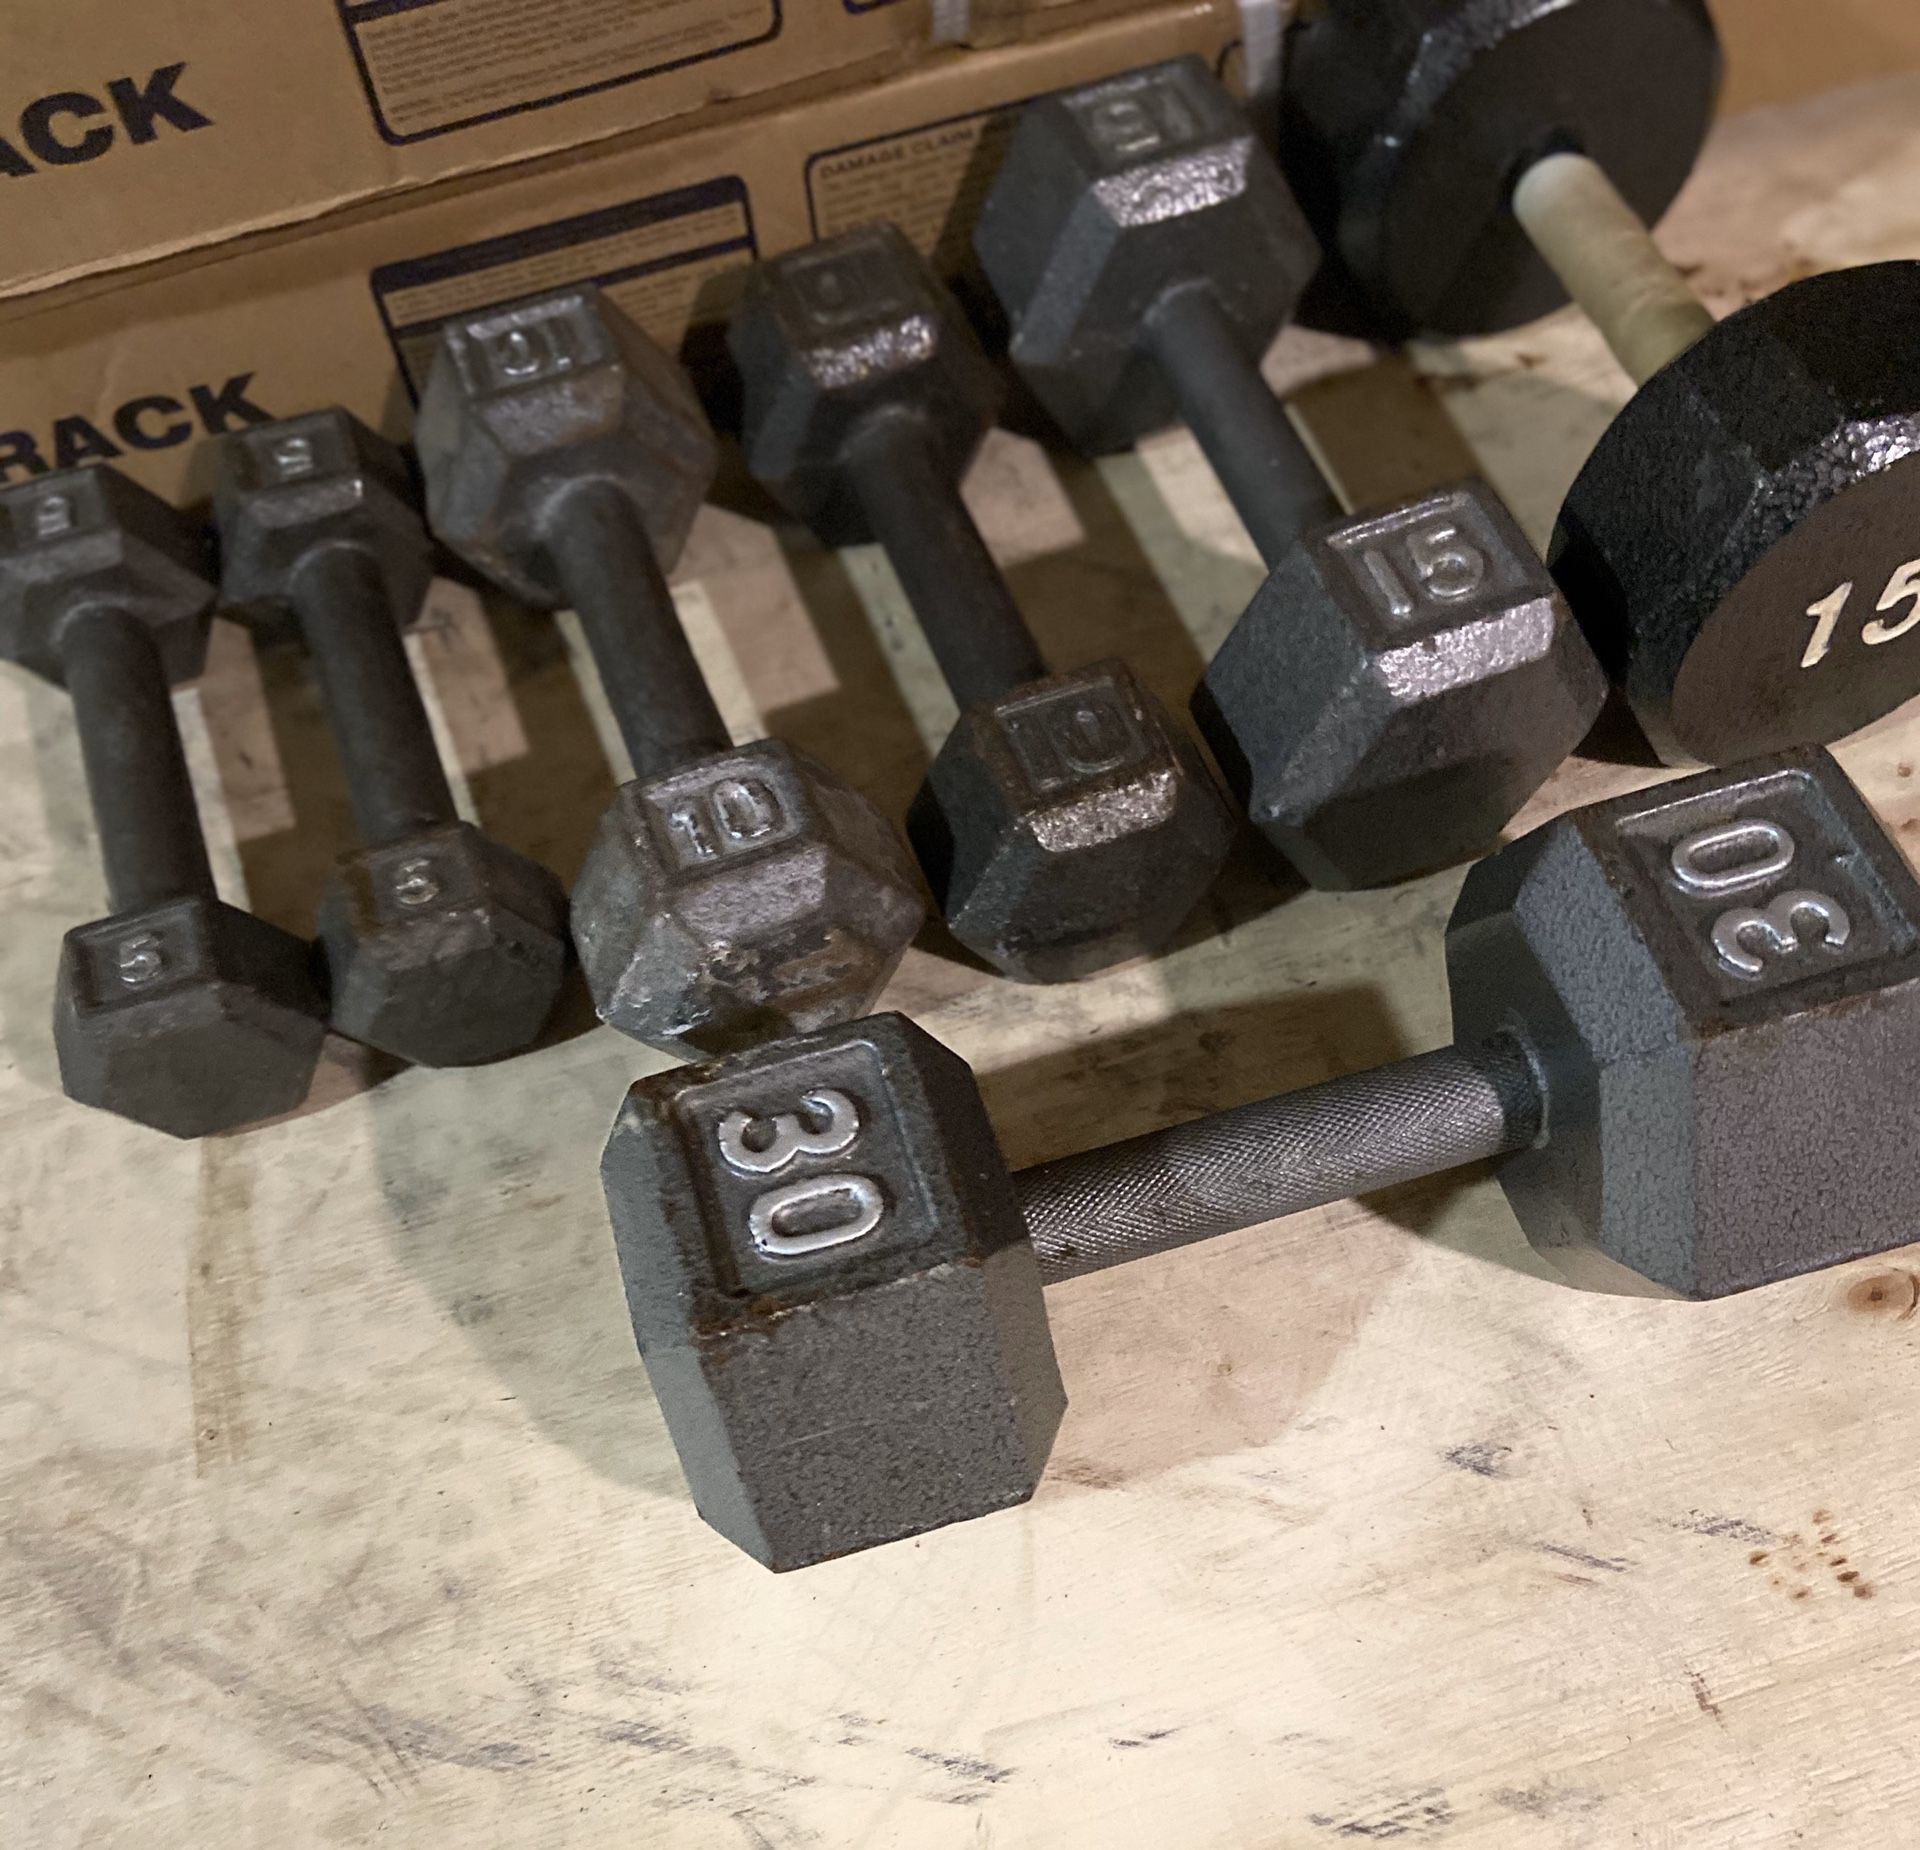 Metal hex dumbbells pair of 5s 10s 15s and a single 30lbs.